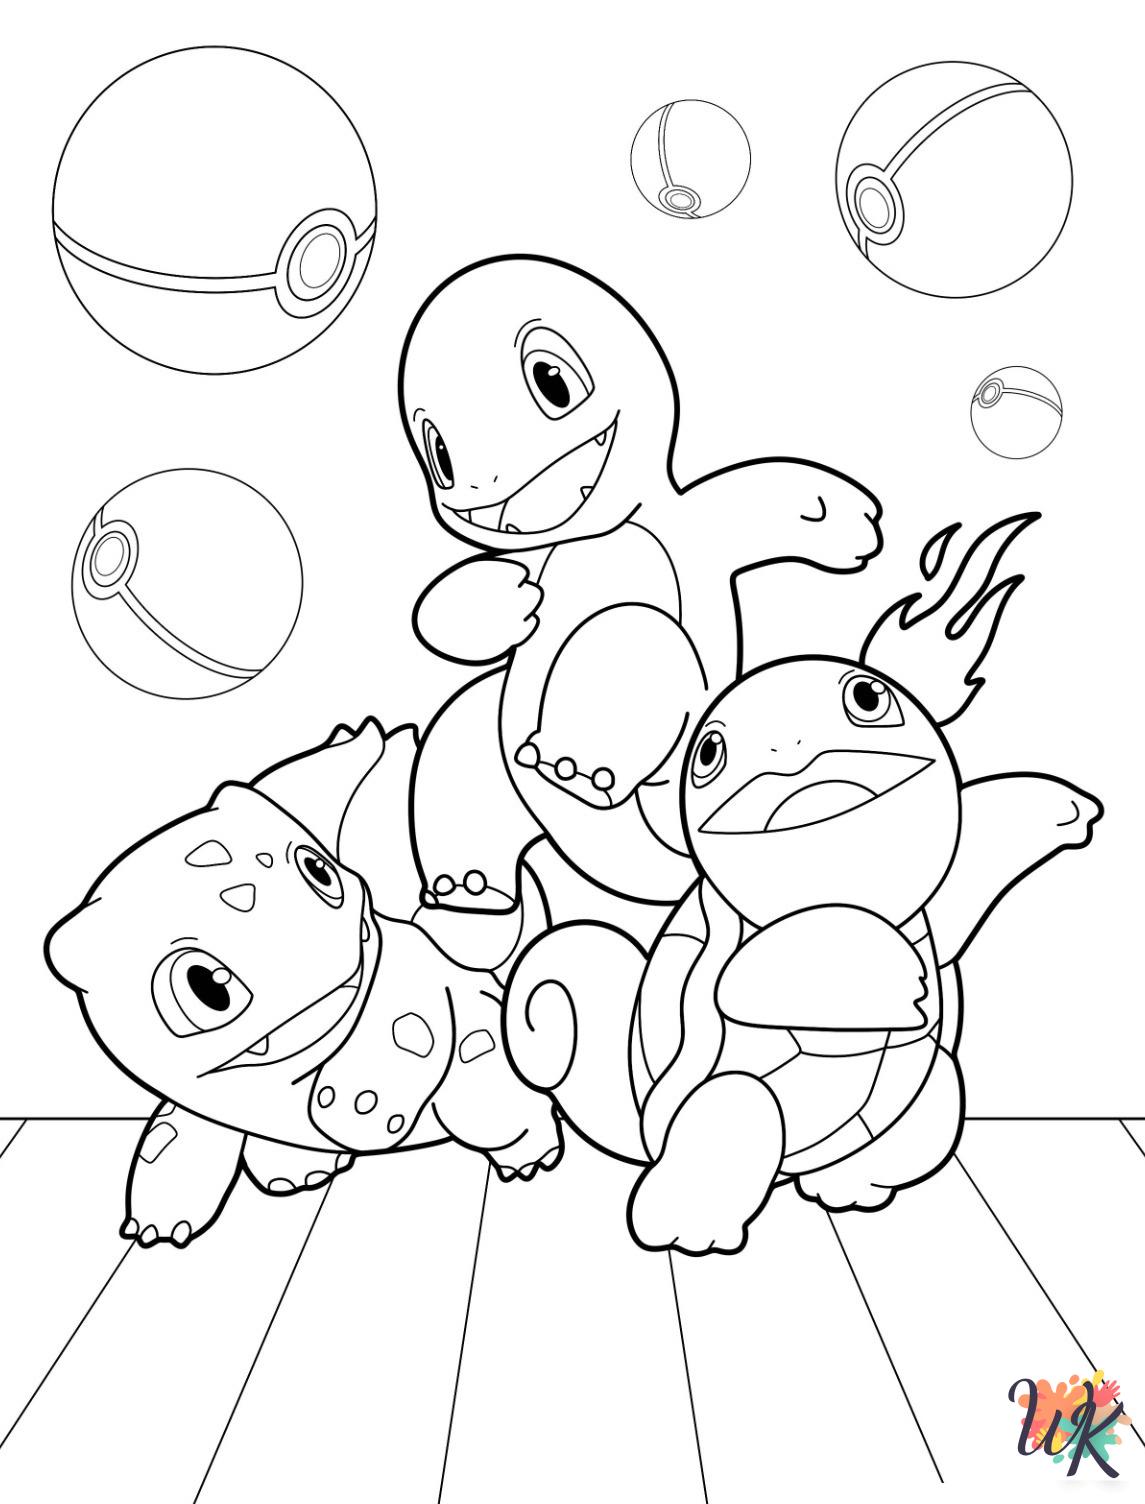 Charmander free coloring pages